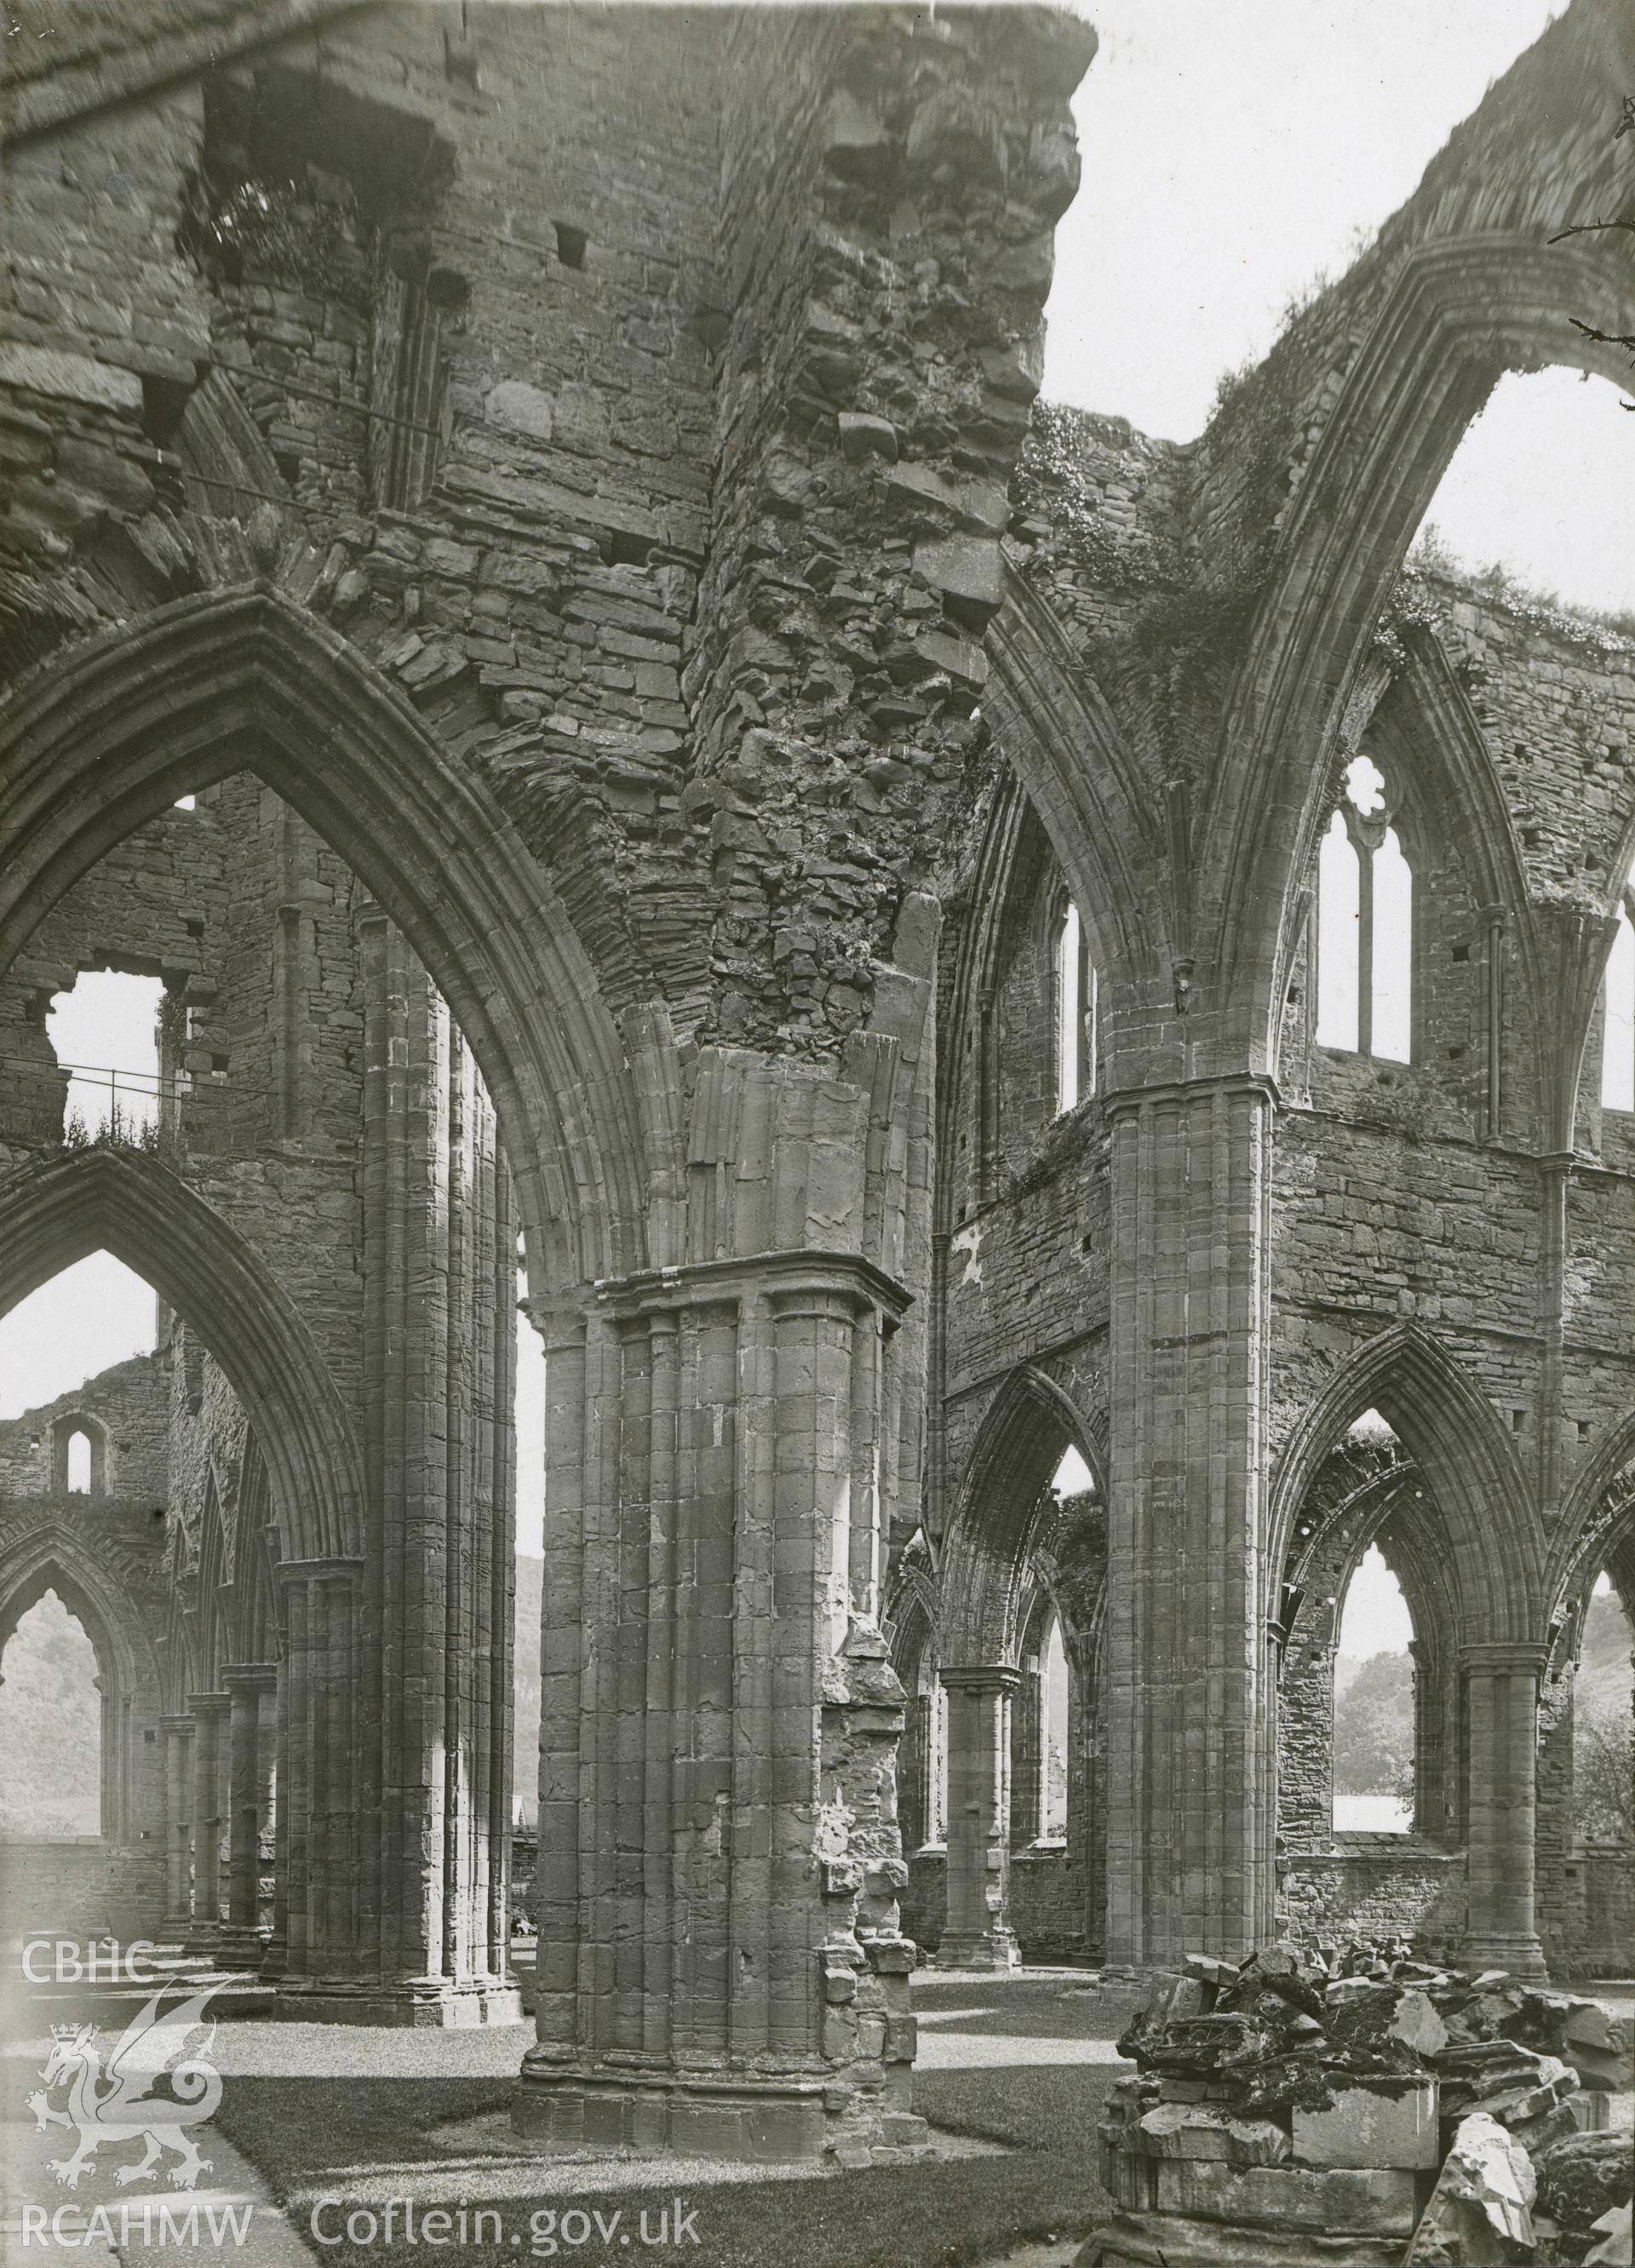 Digital copy of an interior view of Tintern Abbey.